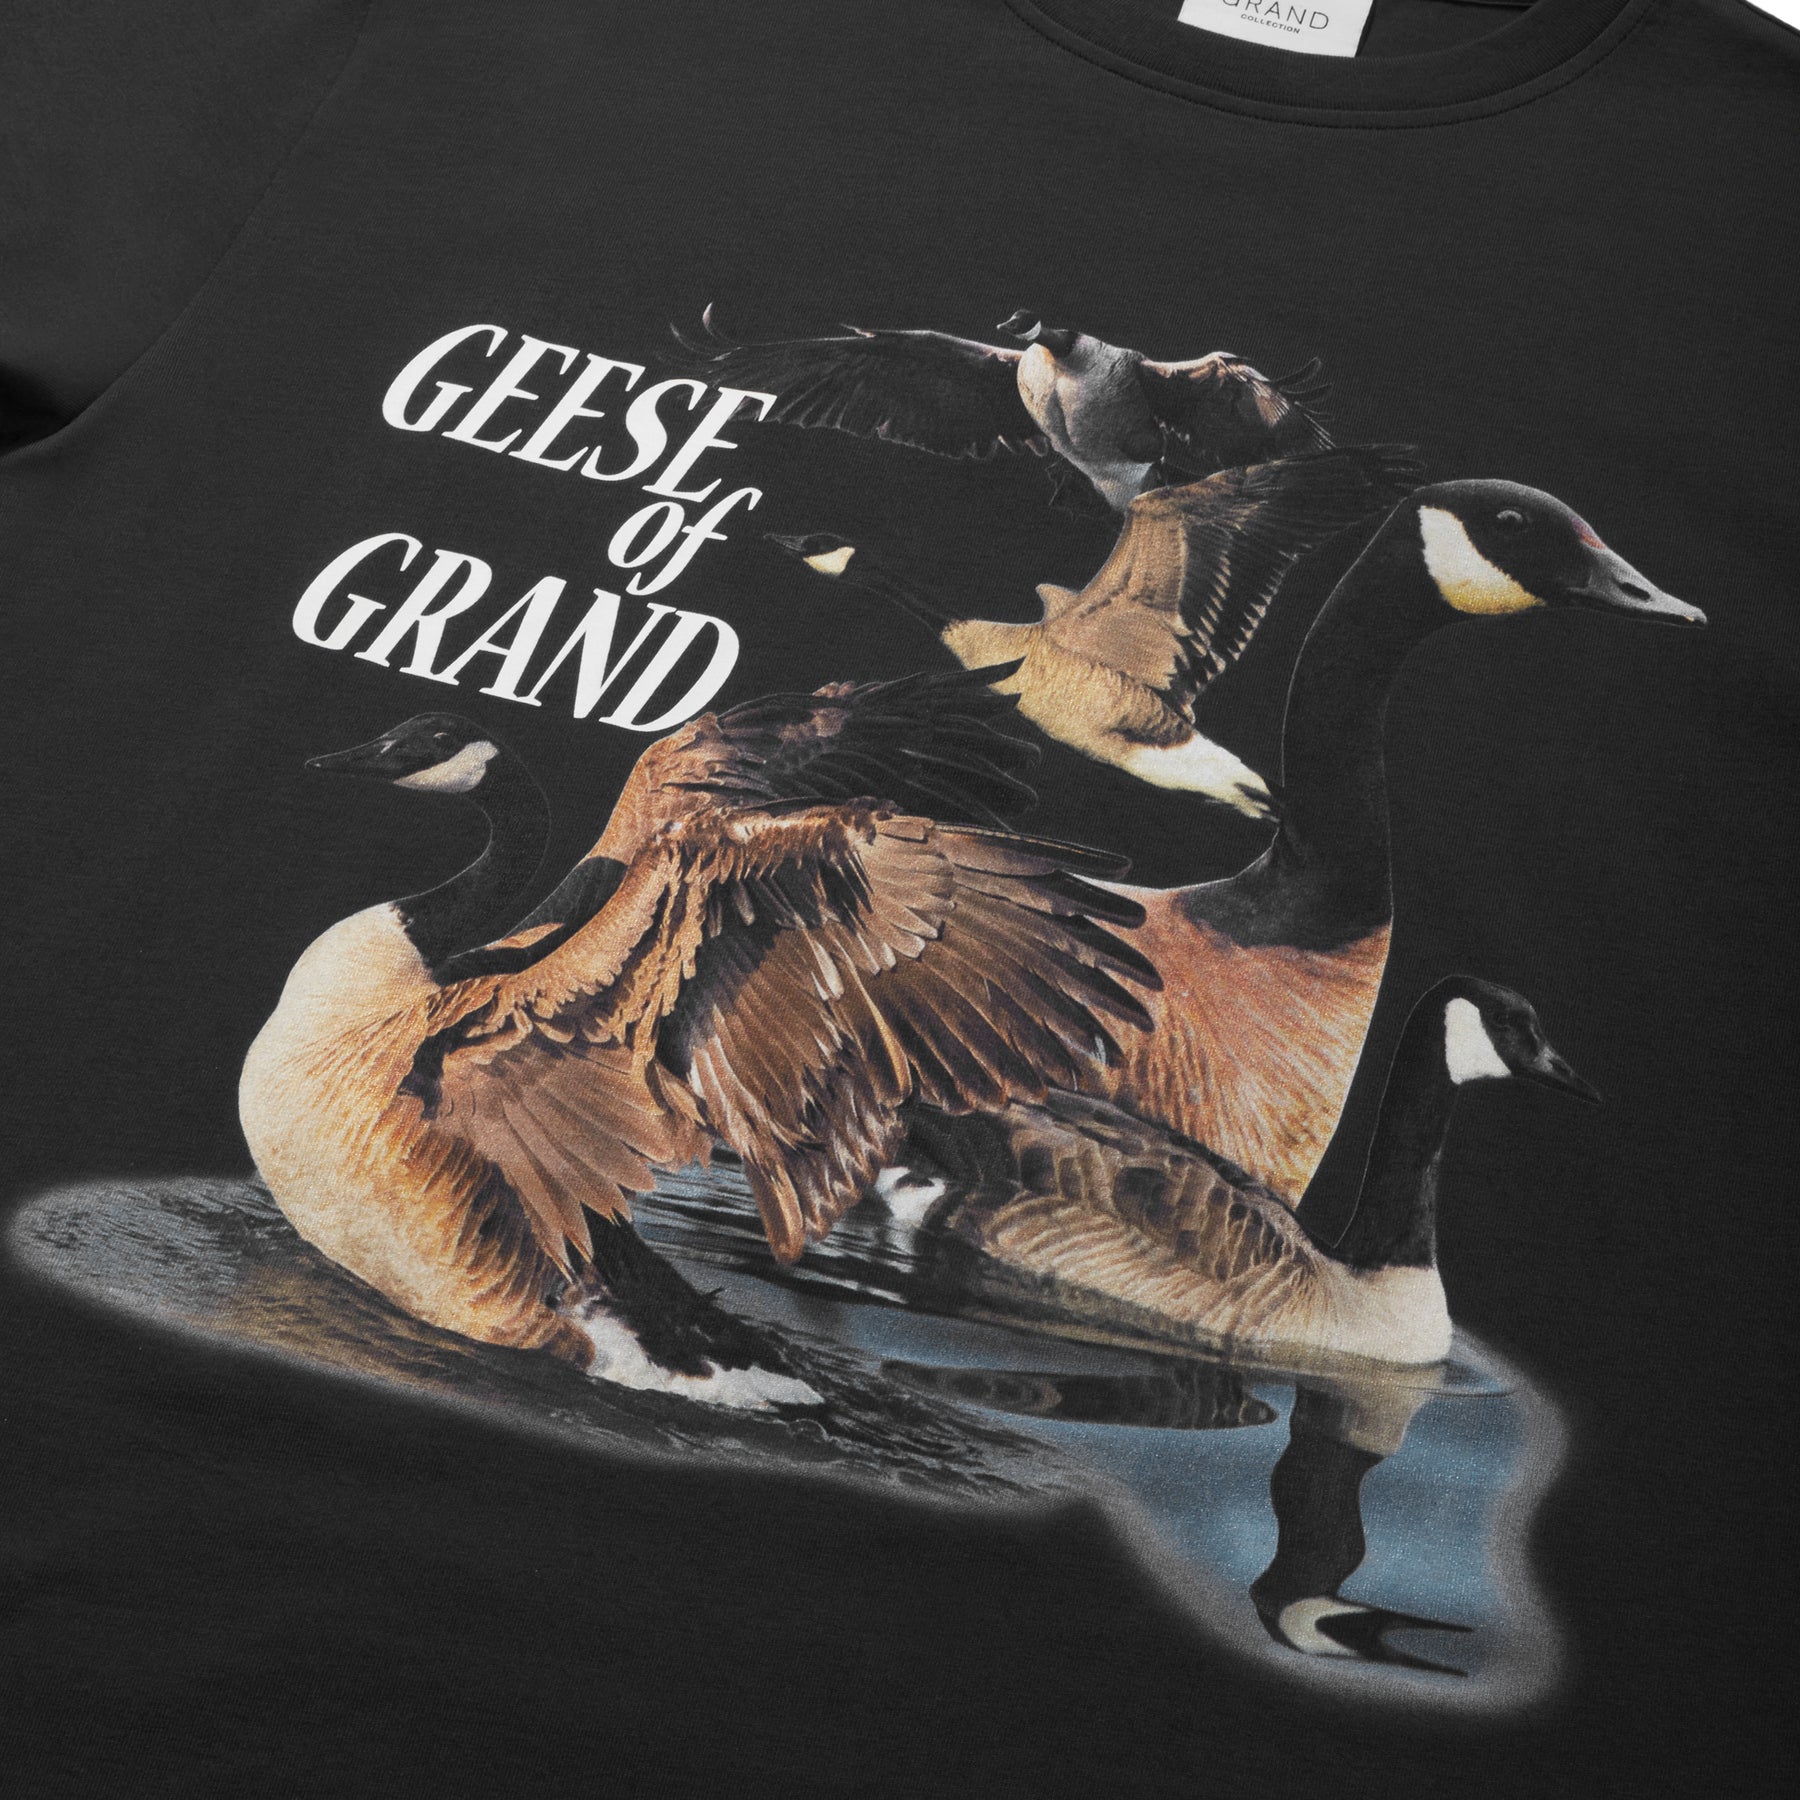 Grand Collection / GEESE OF GRAND T BLACK